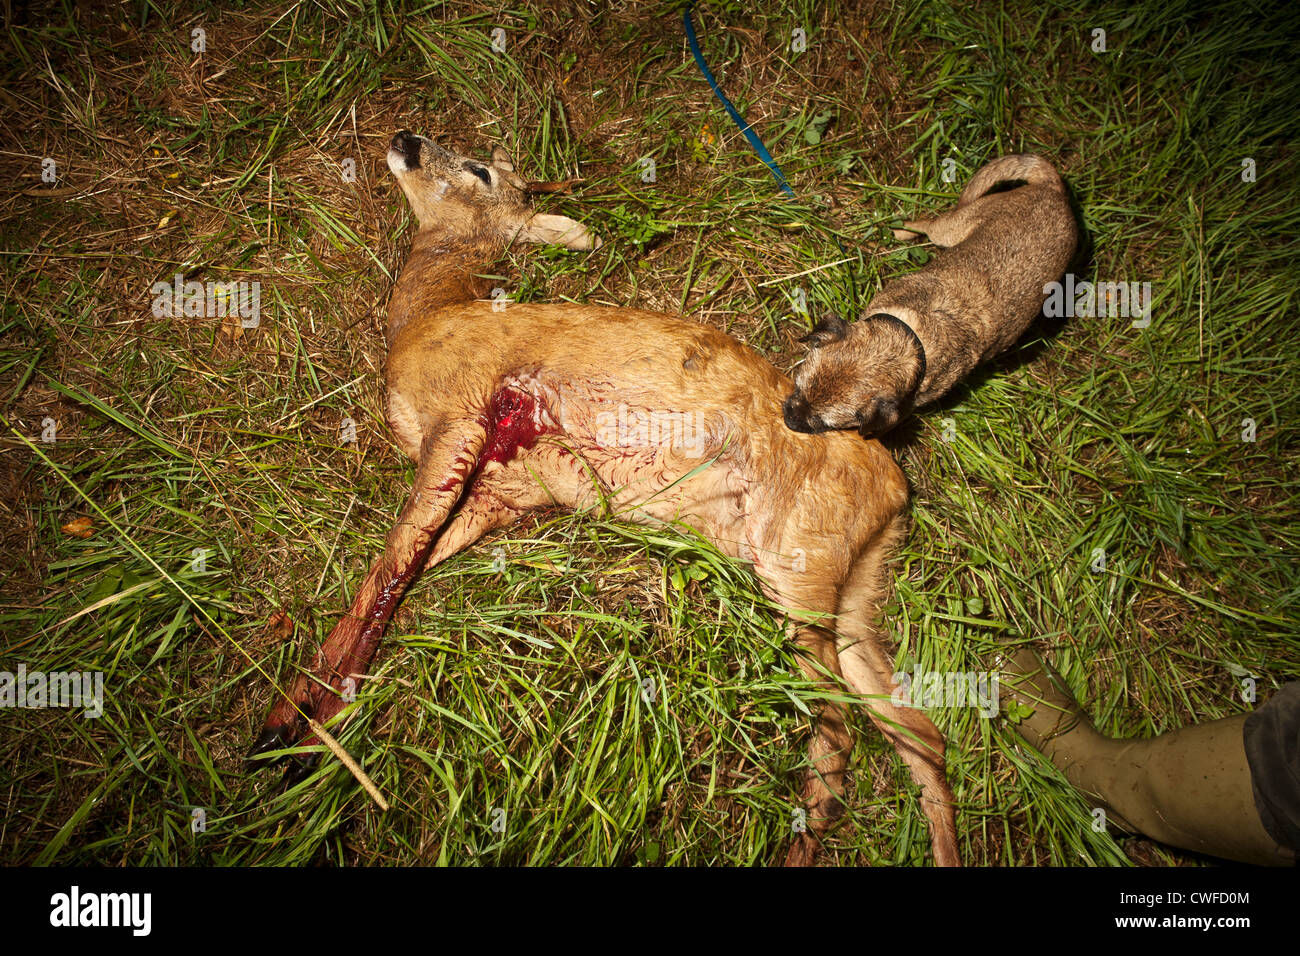 Buck roe deer (Capreolus capreolus) lying dead in grass with bullet exit hole and tracking dog-a border terrier. Stock Photo